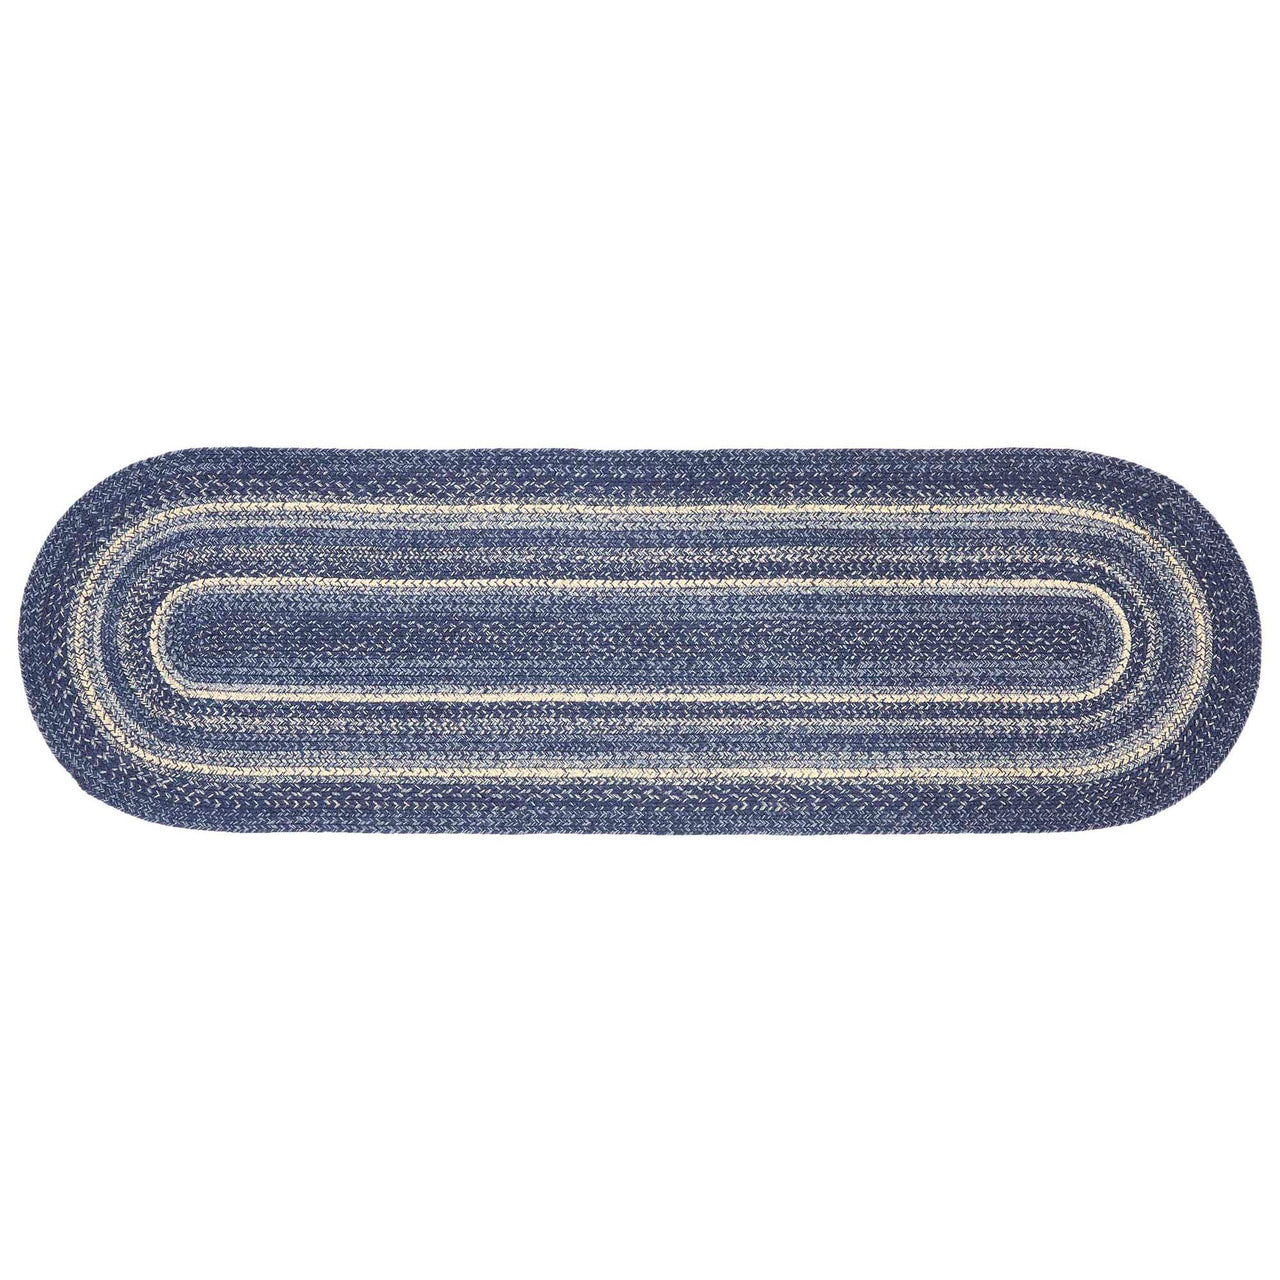 Great Falls Blue Jute Braided Rug/Runner Oval with Rug Pad 22"x72" VHC Brands